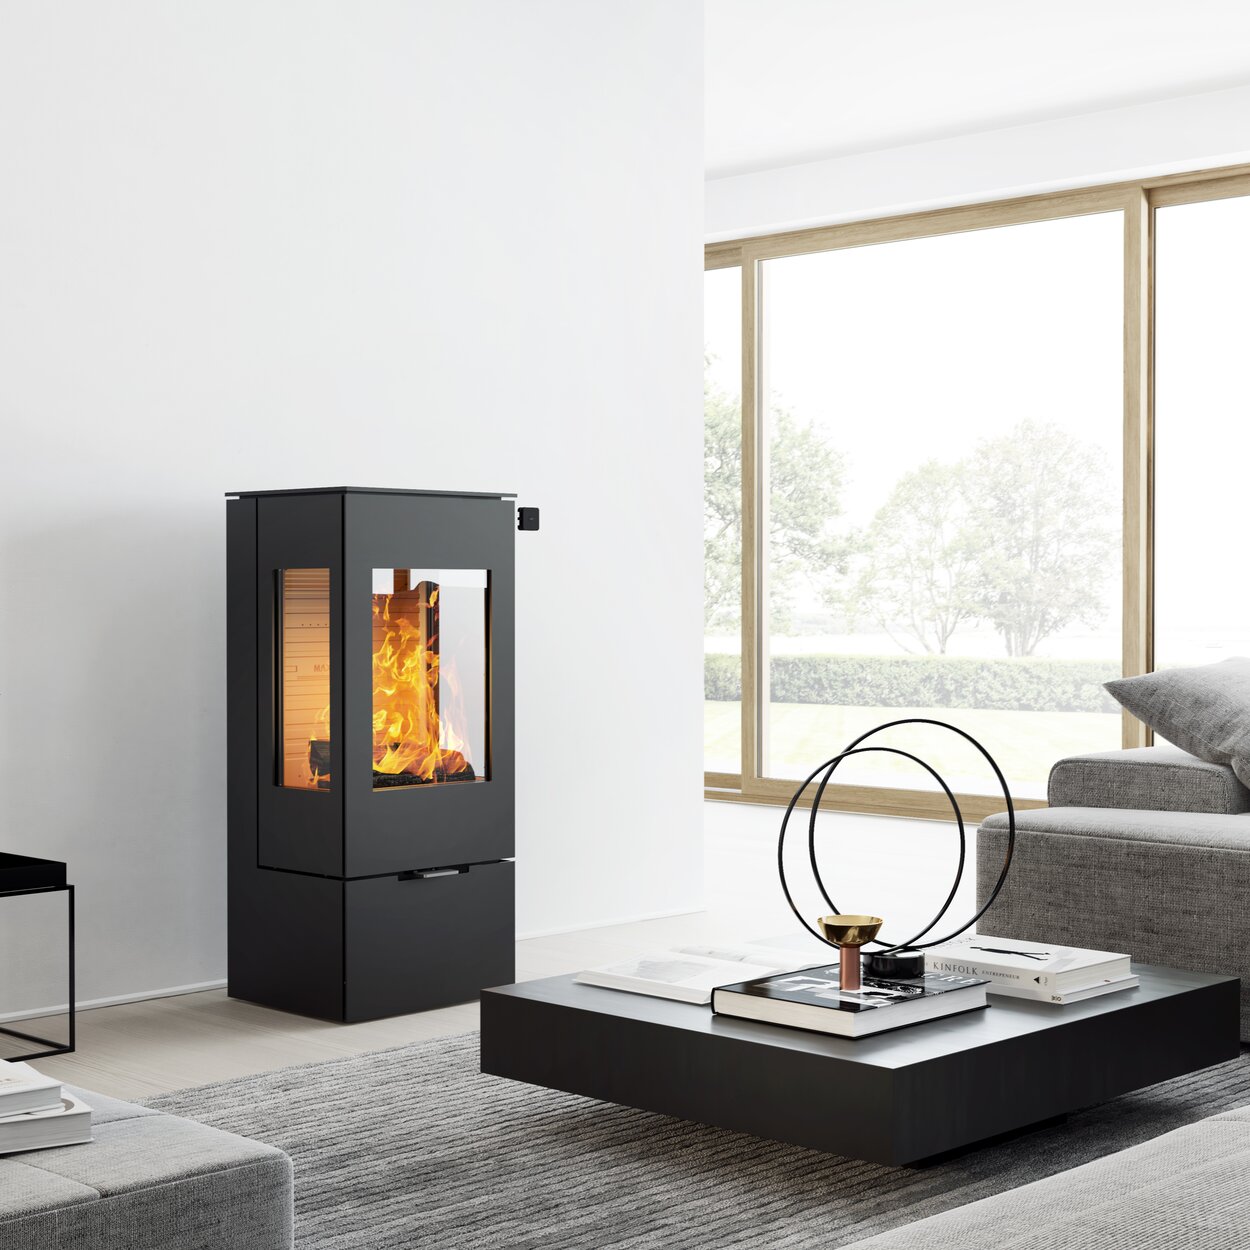 Wood stove NEXO 100 in black with steel door and two side windows in a modern, bright living room